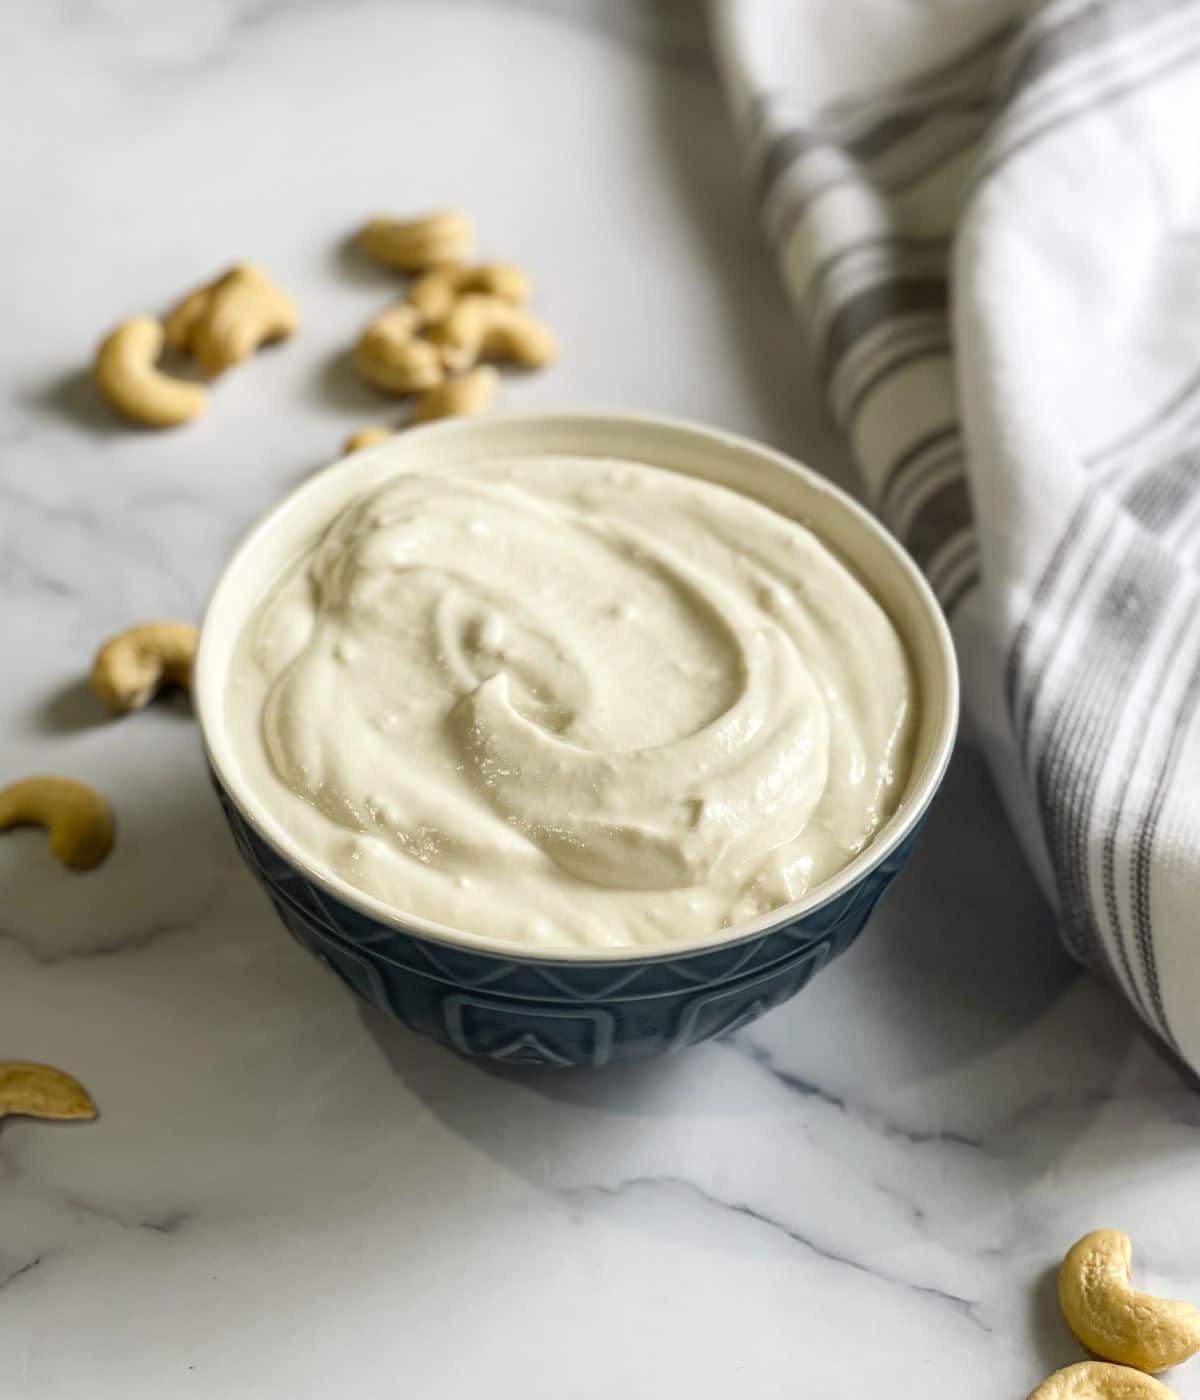 A bowl of cashew yogurt is on the table.